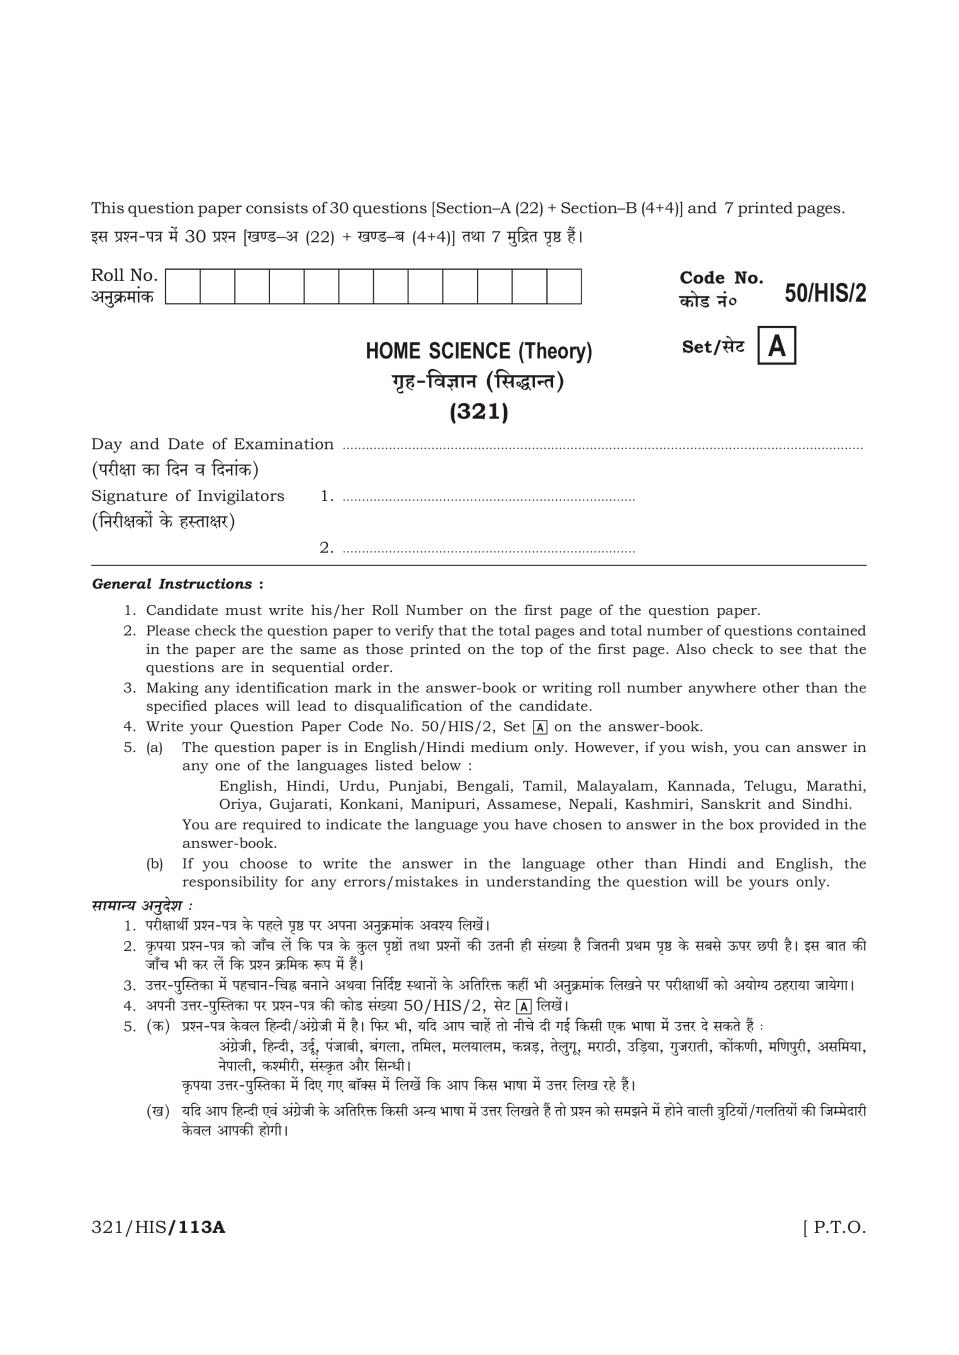 NIOS Class 12 Question Paper Apr 2015 - Home Science - Page 1